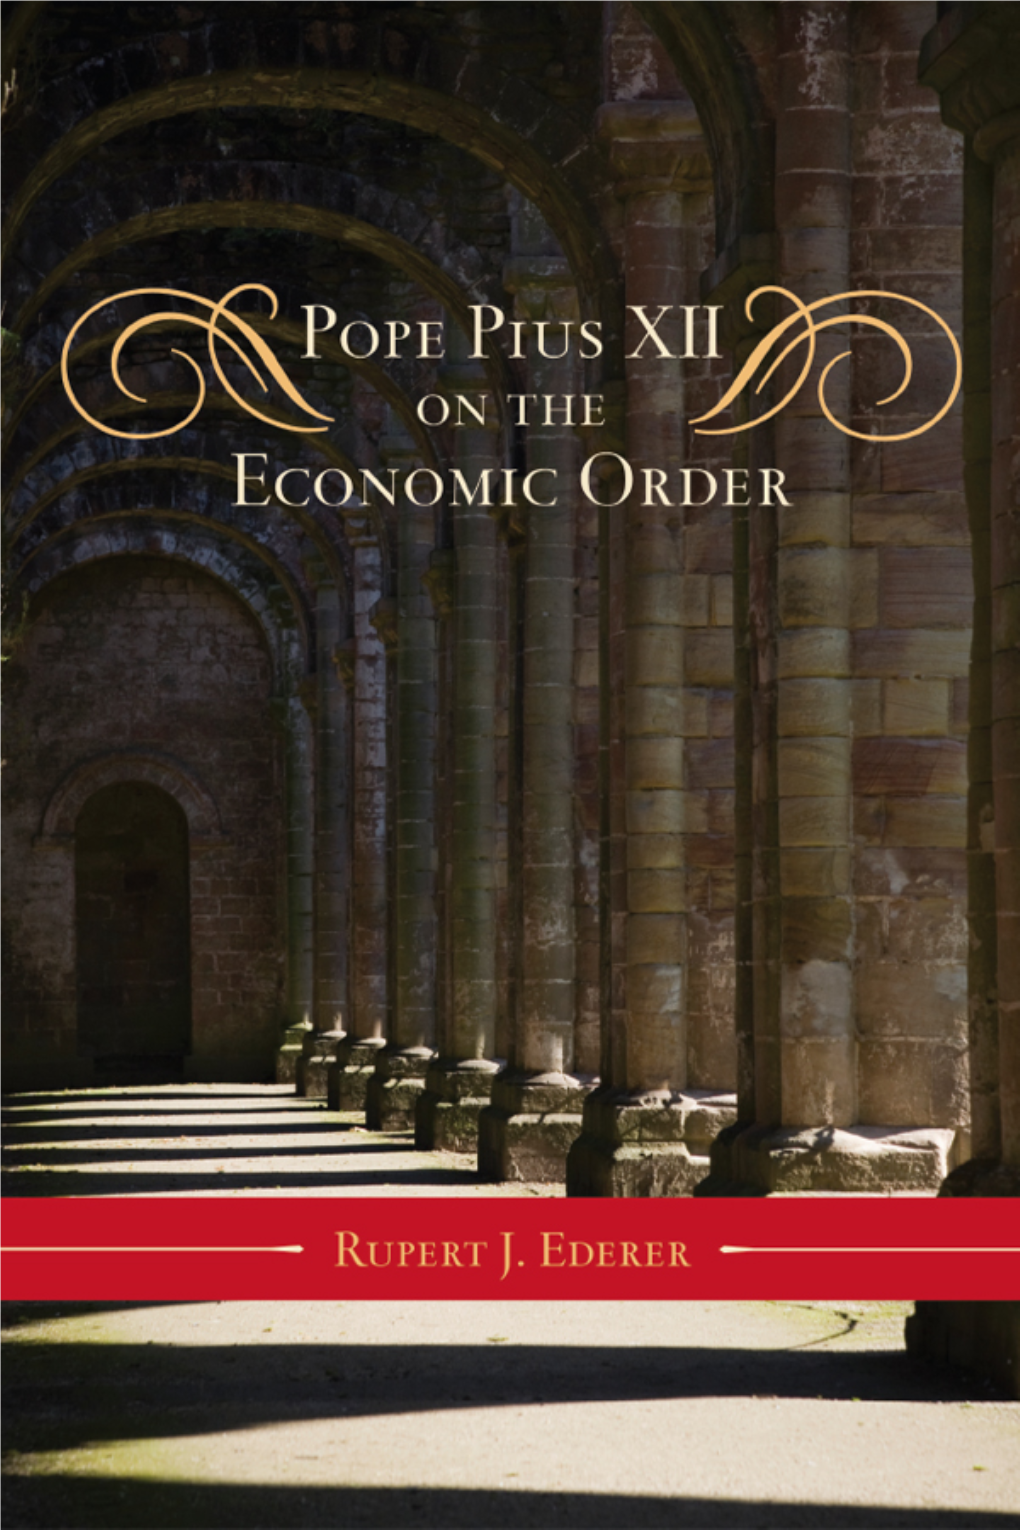 Pope Pius XII on the Economic Order, Will Be Hailed As a Great Contribution to the Science of Economics and the Study of Pope Pius XII